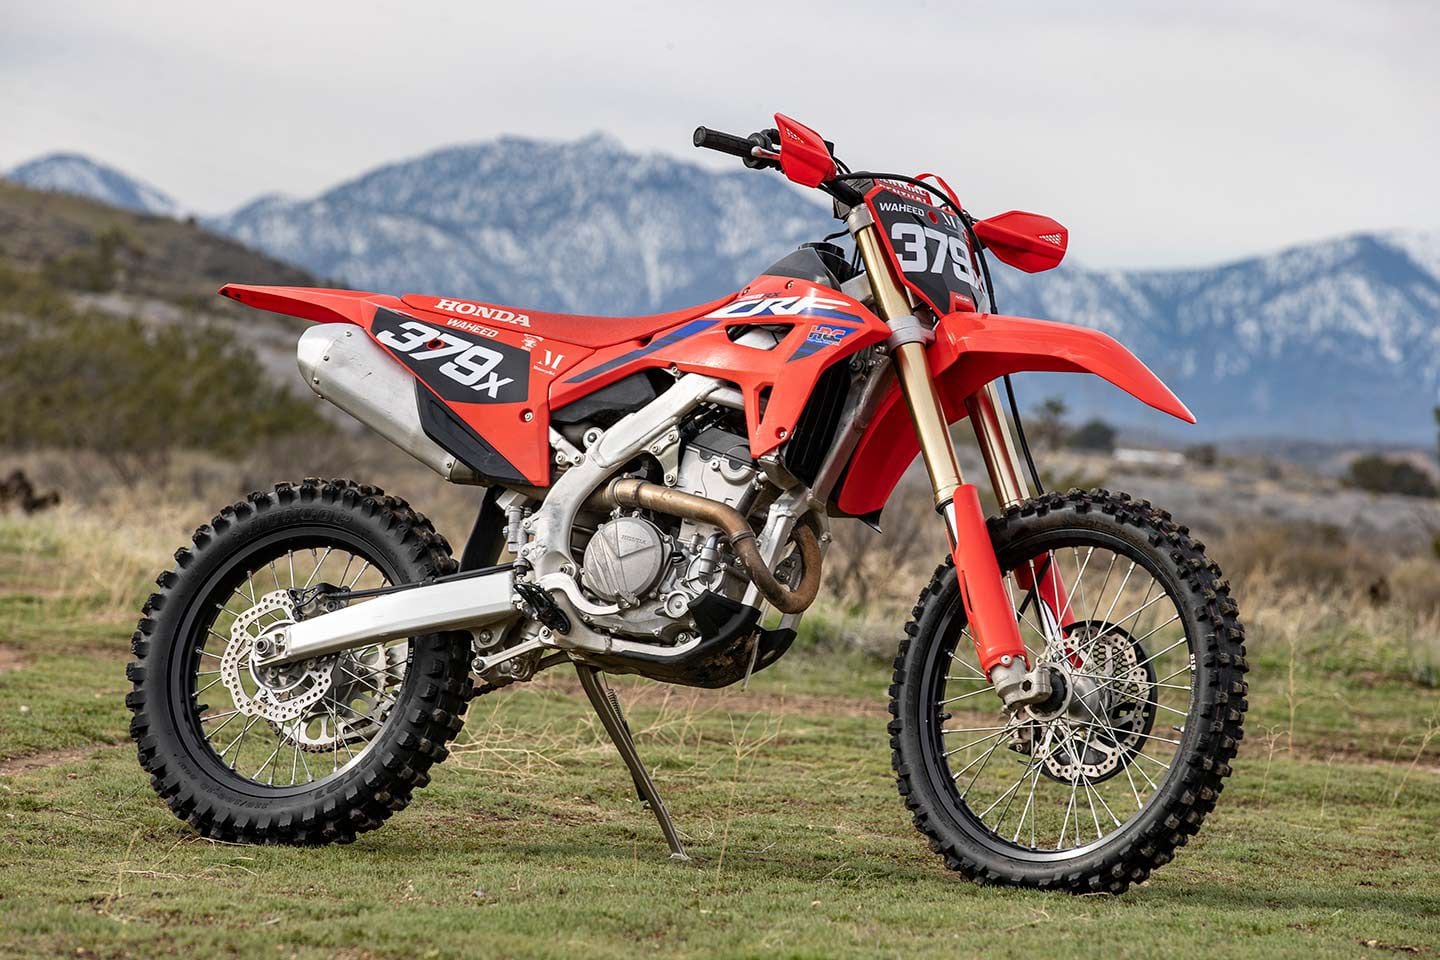 Overhauled for ‘22, the CRF250RX is a competition specification off-road racer designed in parallel with the CRF250R motocross bike.